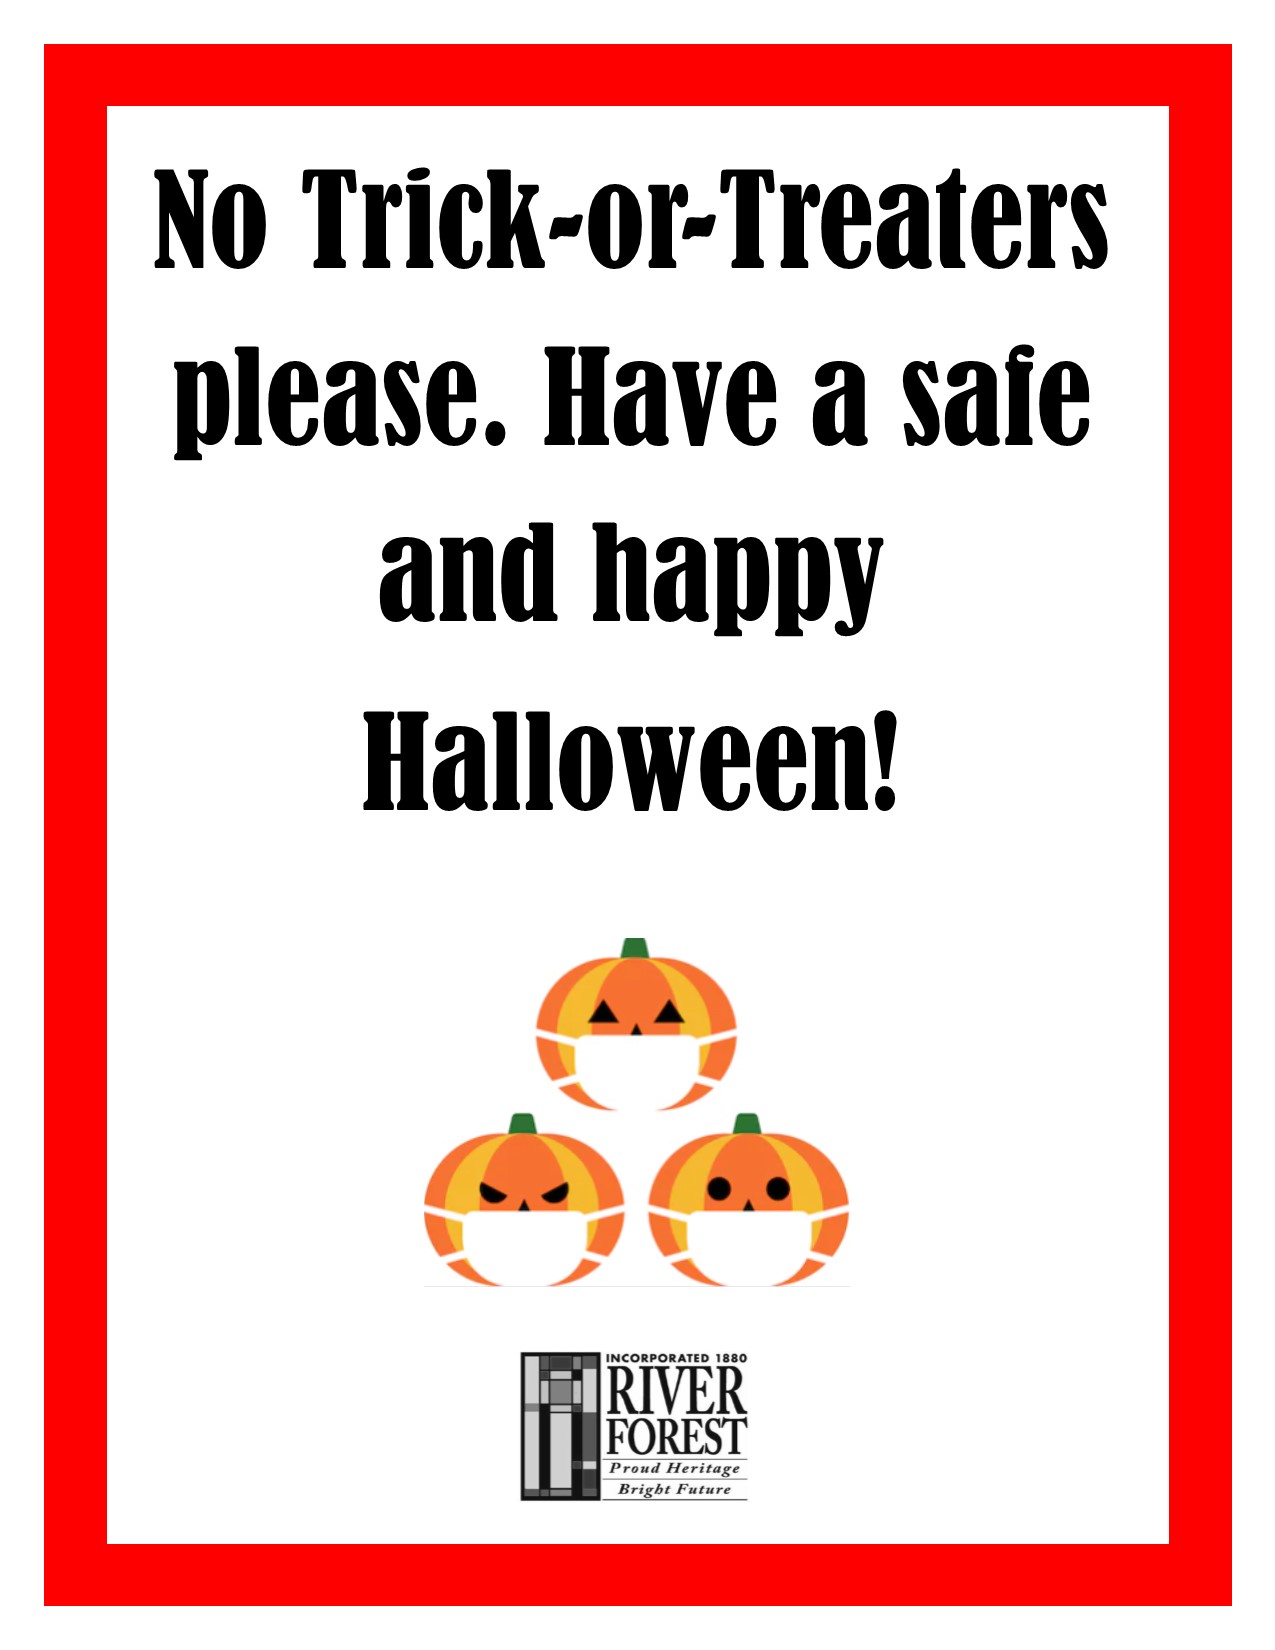 Village Issues TrickOrTreating Guidelines For River Forest Oak Park